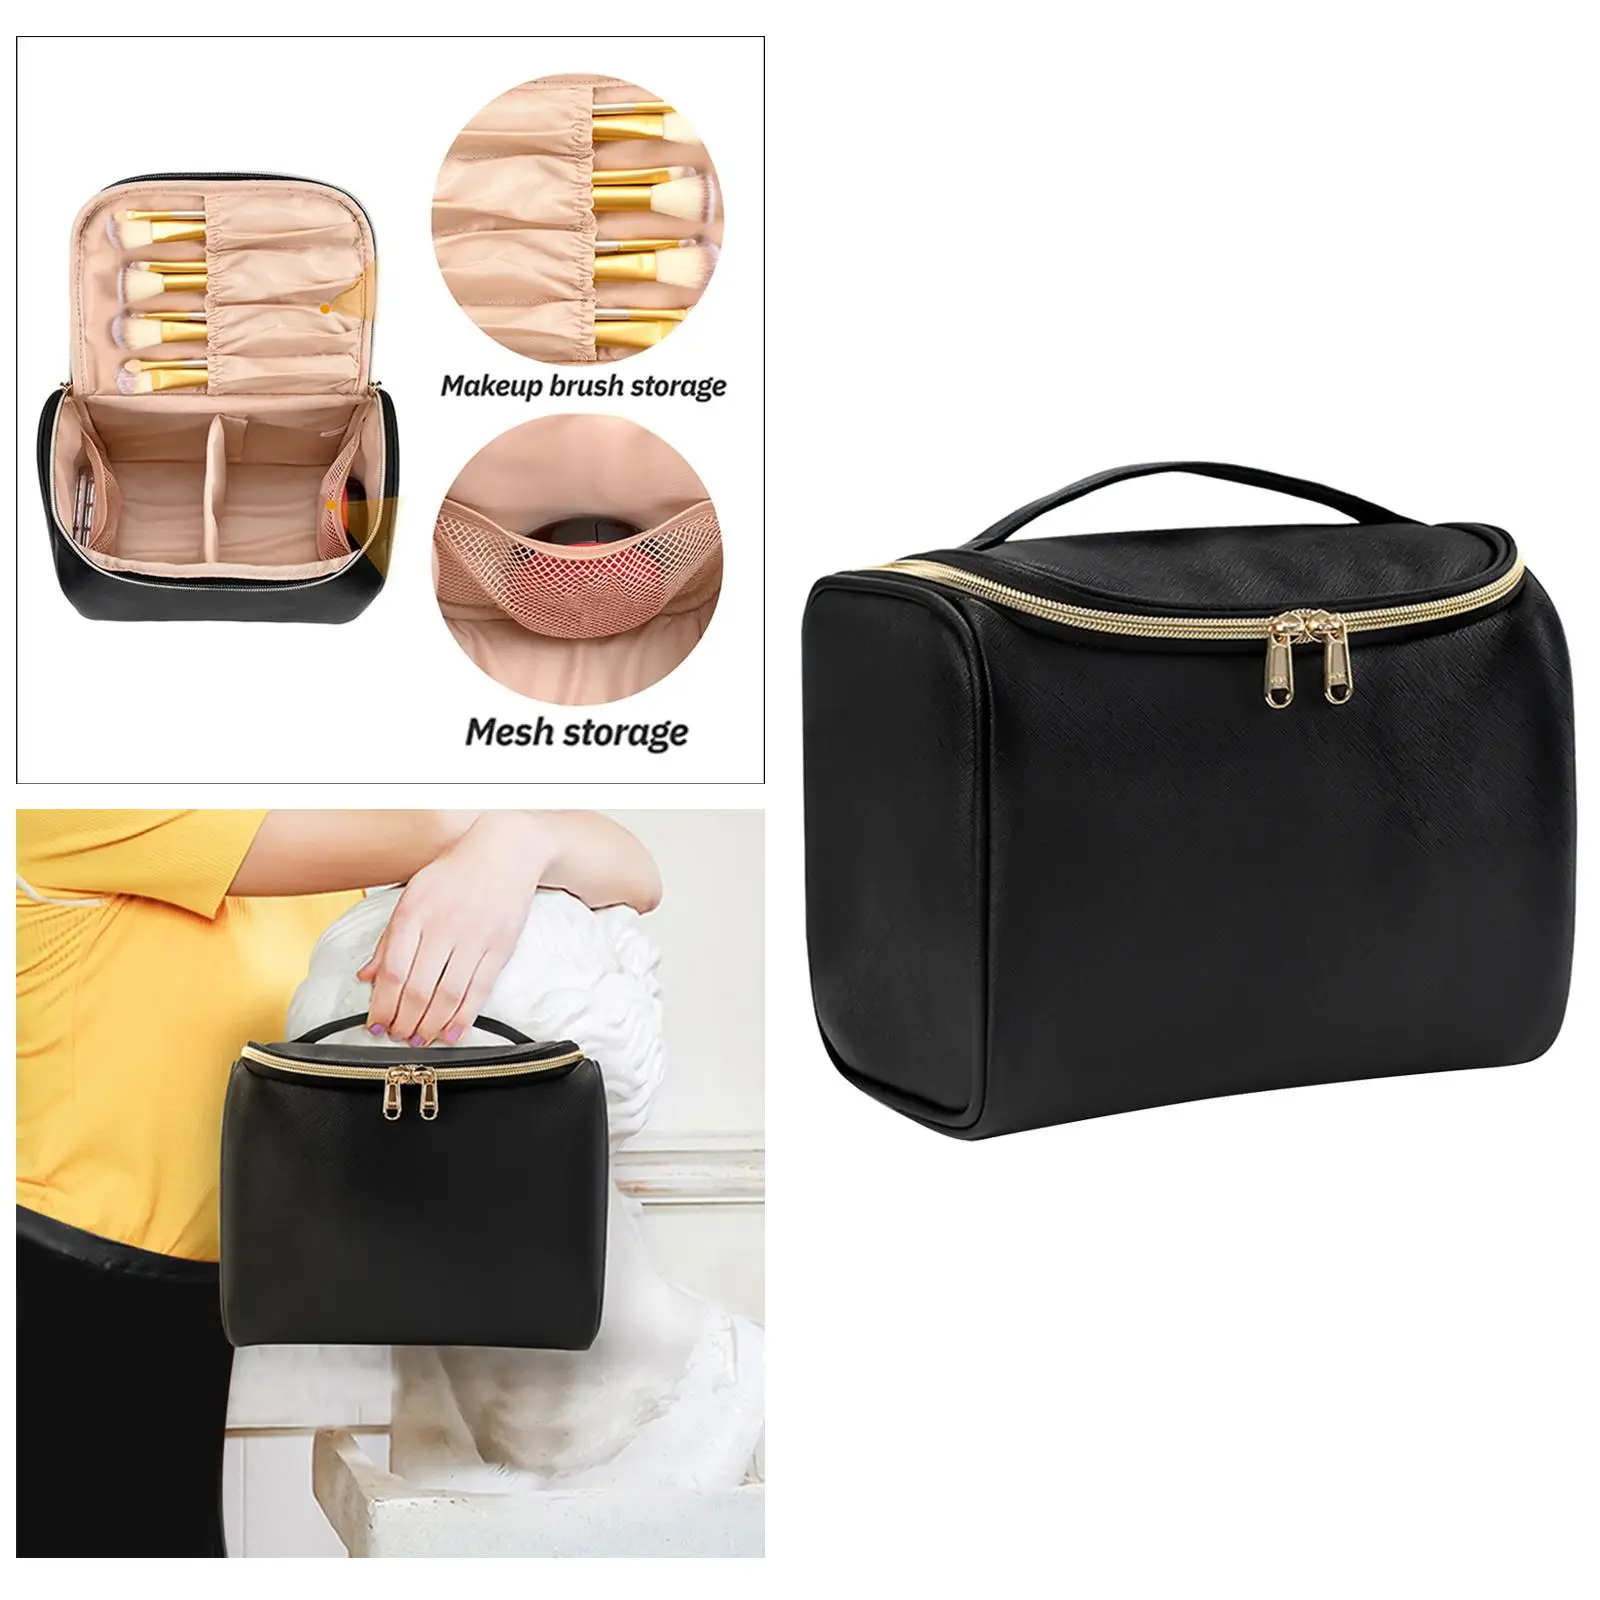 Travel Makeup Bag Case  Carry for Toiletries Accessories 23x16x19cm ,Made of Quality Waterproof PU Leather